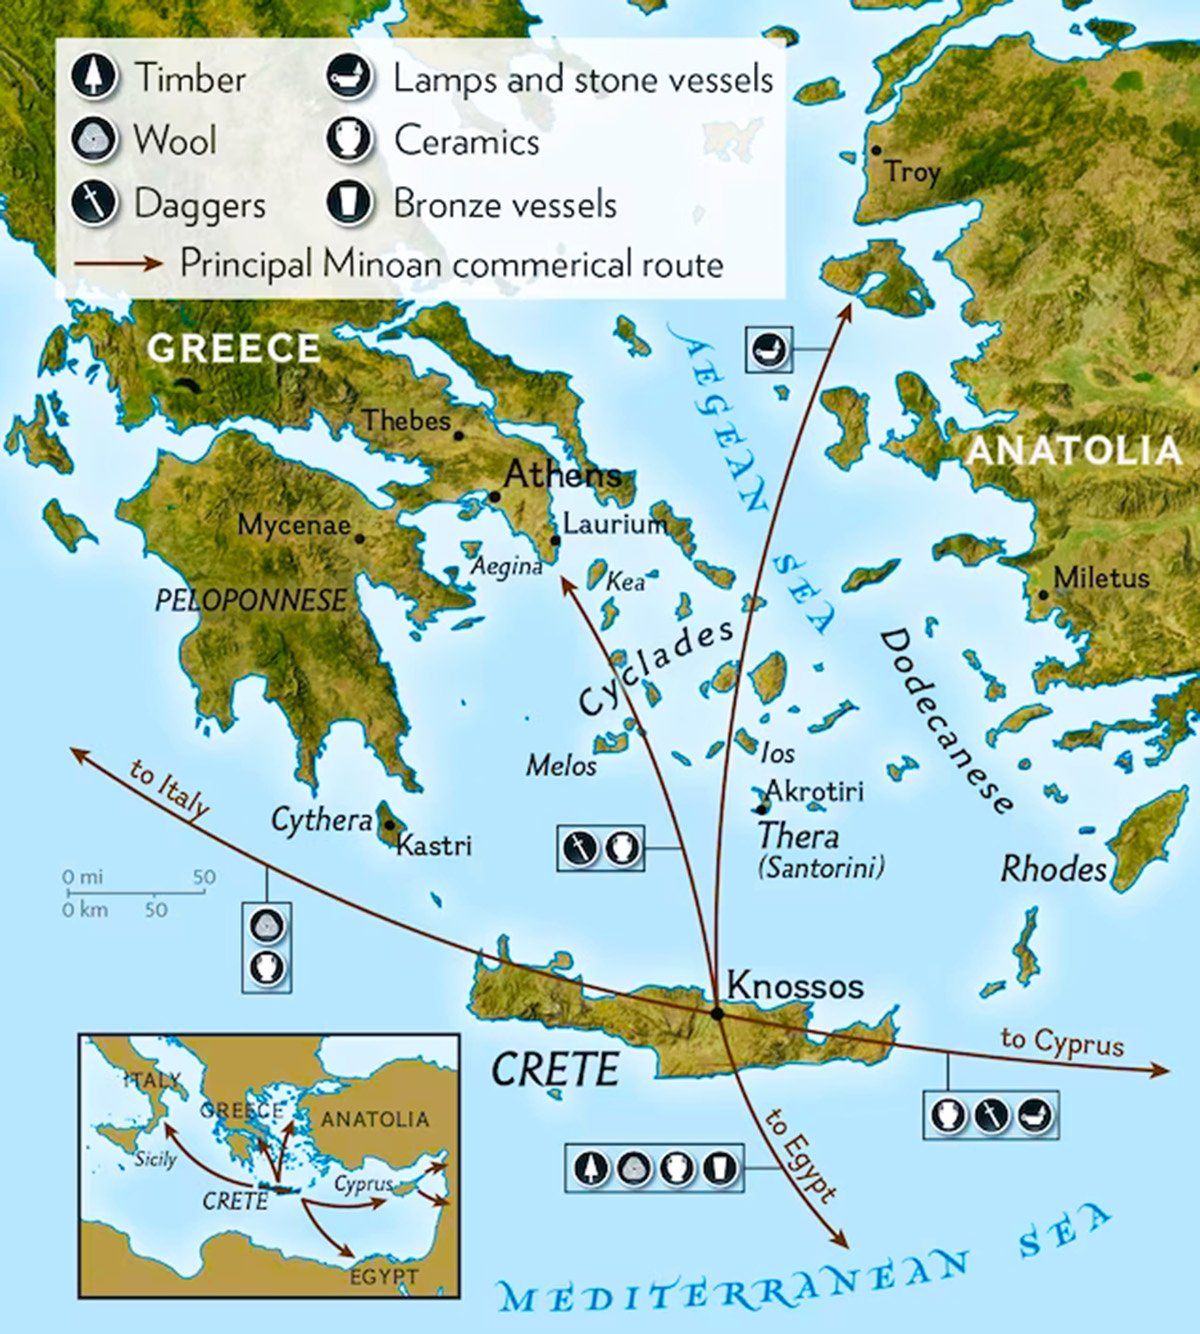 Minoan trade routes map.